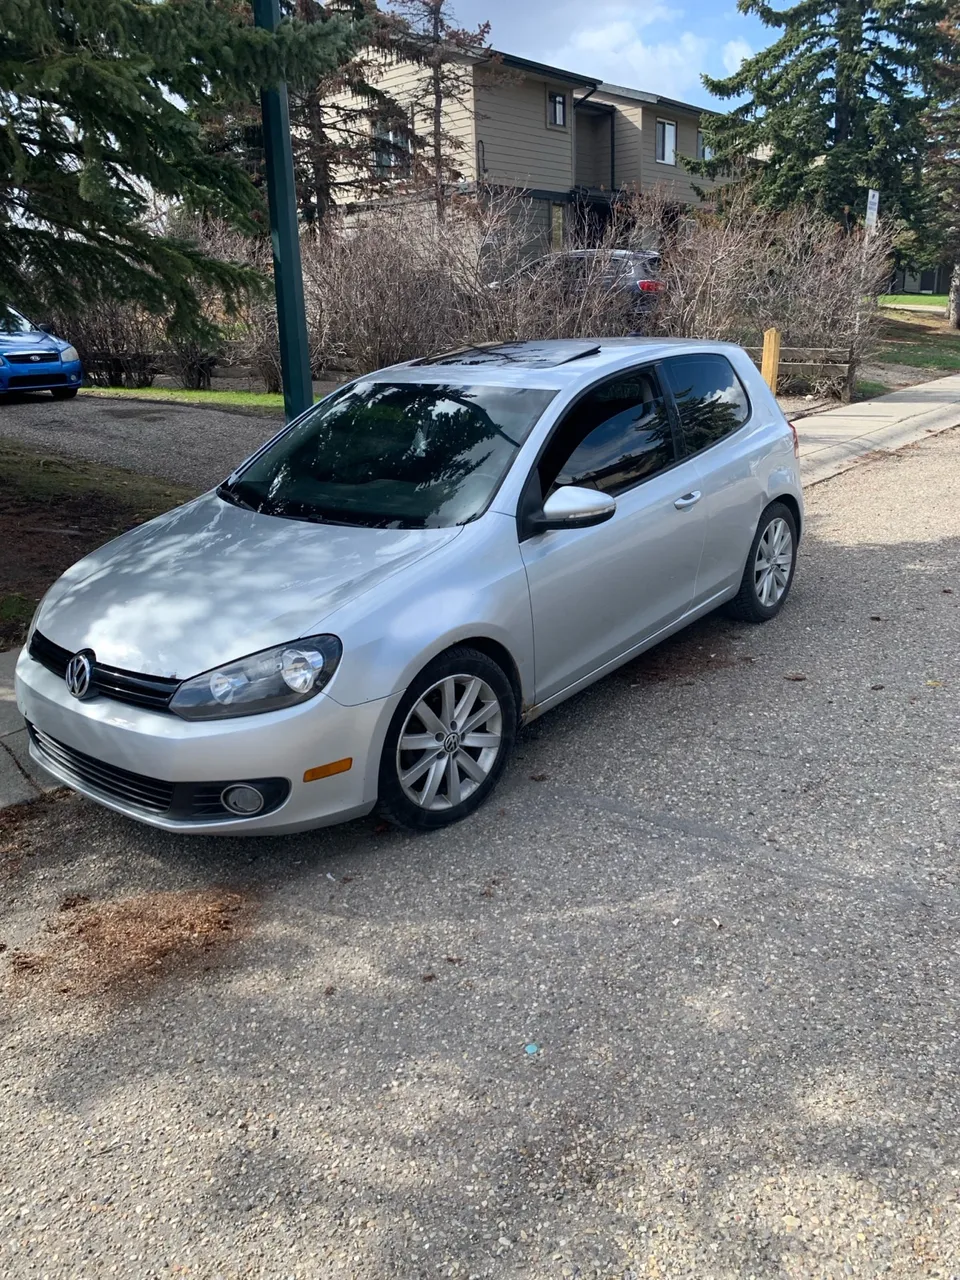 2010 VW Golf 2.5 $6000 cash if gone today!!!